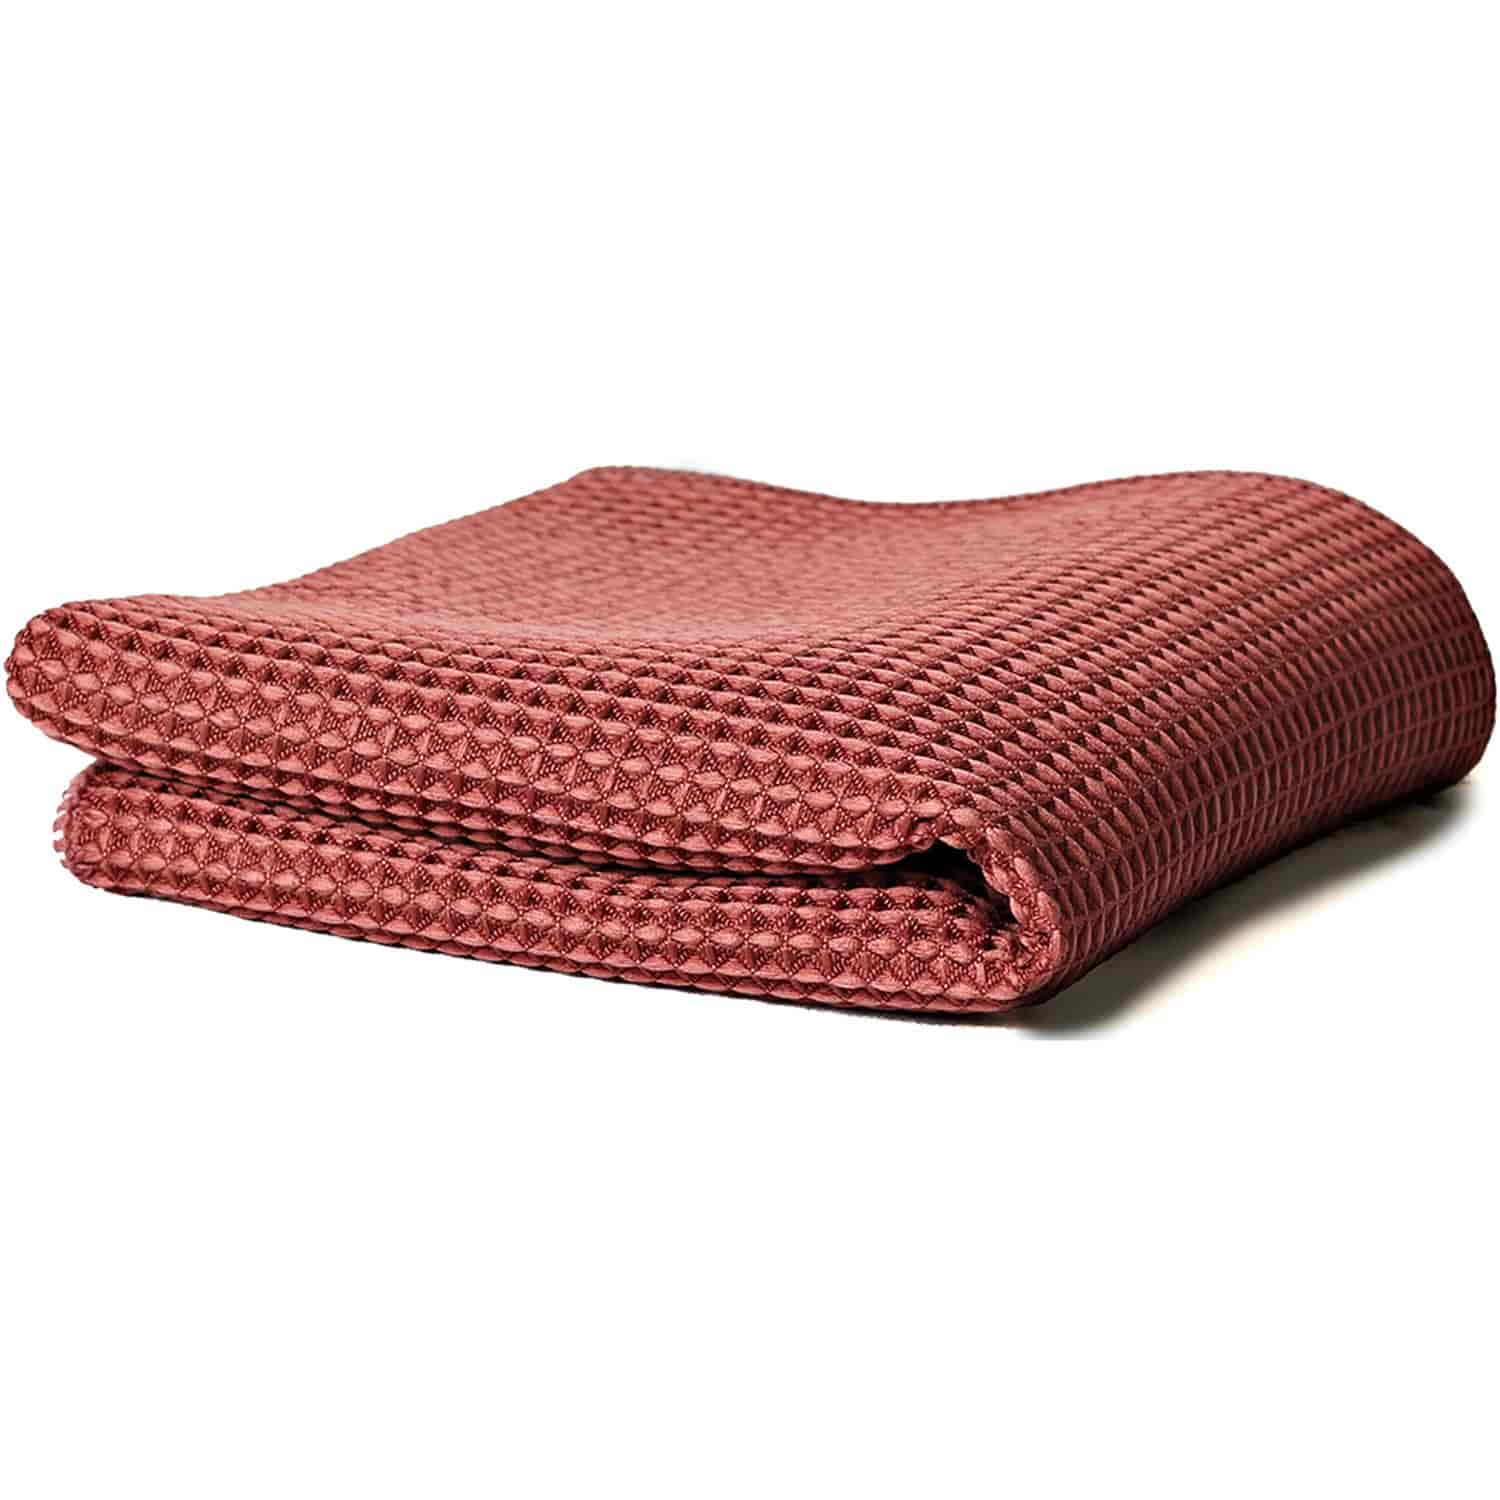 Waffle Weave Glass Cleaning Towel